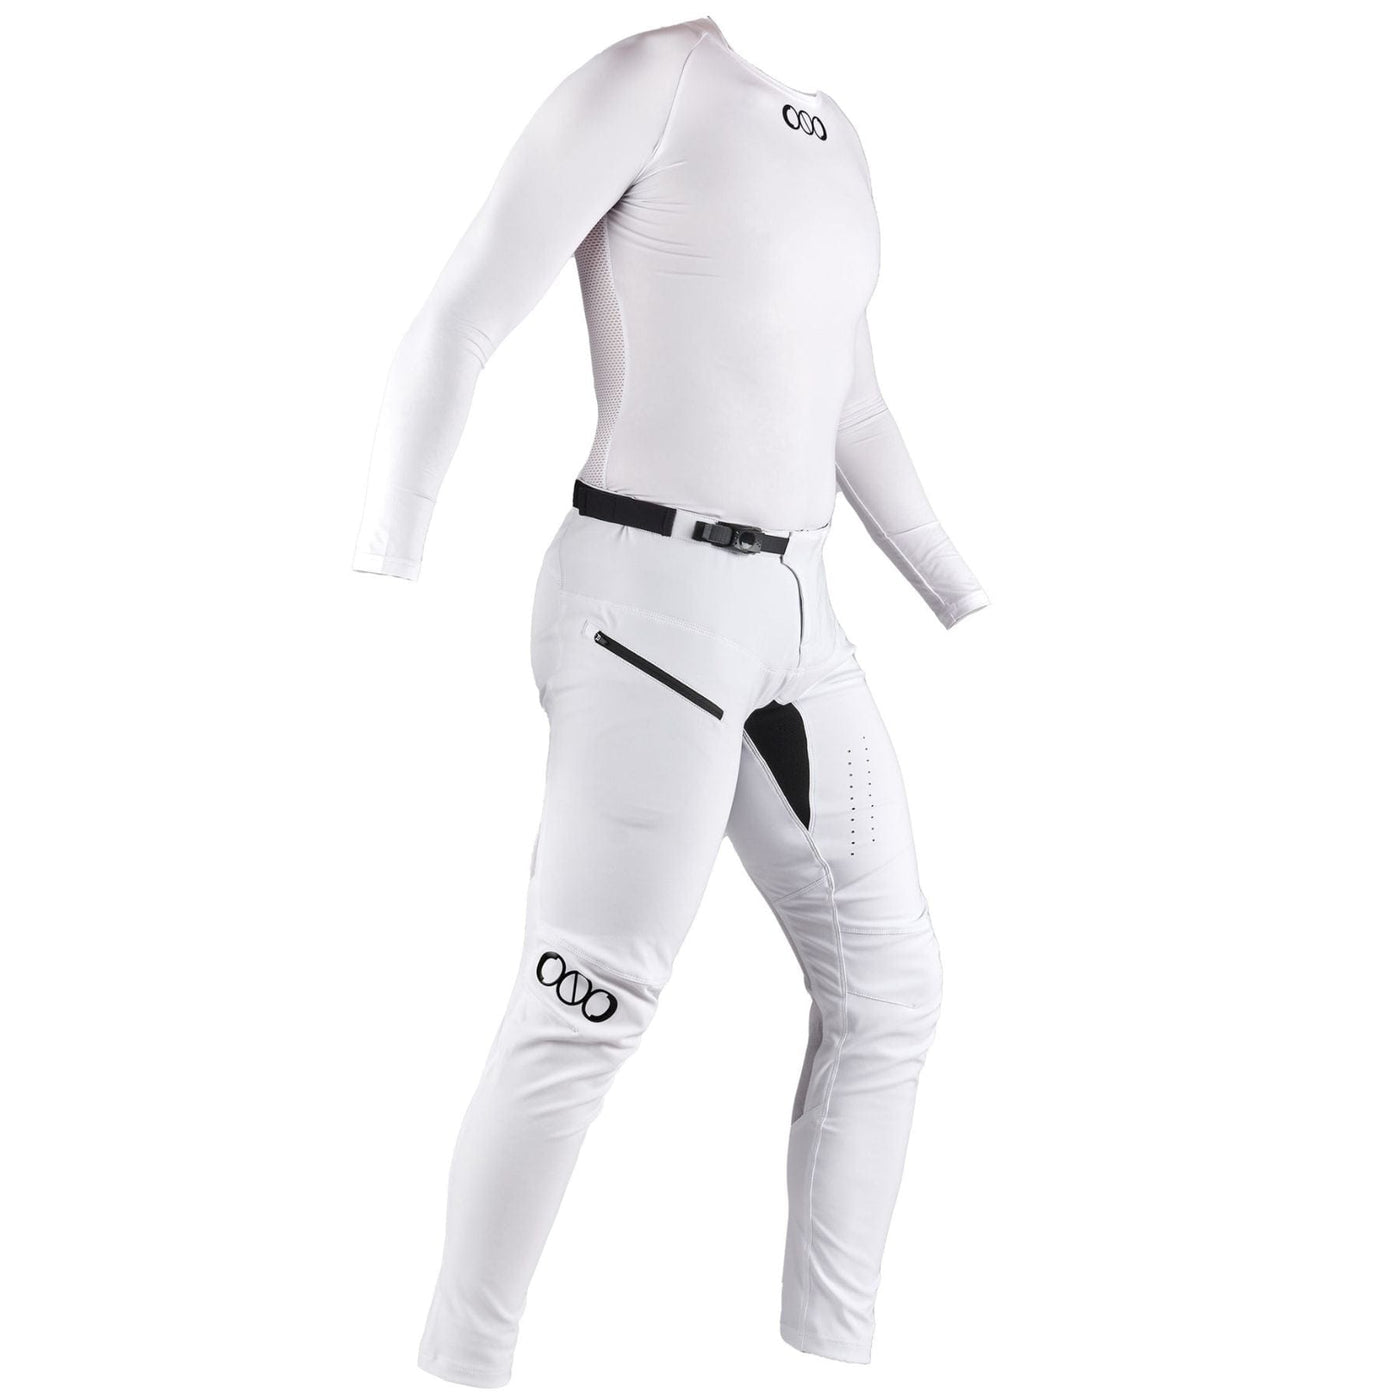 NoLogo Racer Adult Long Sleeve Cycling Jersey - White